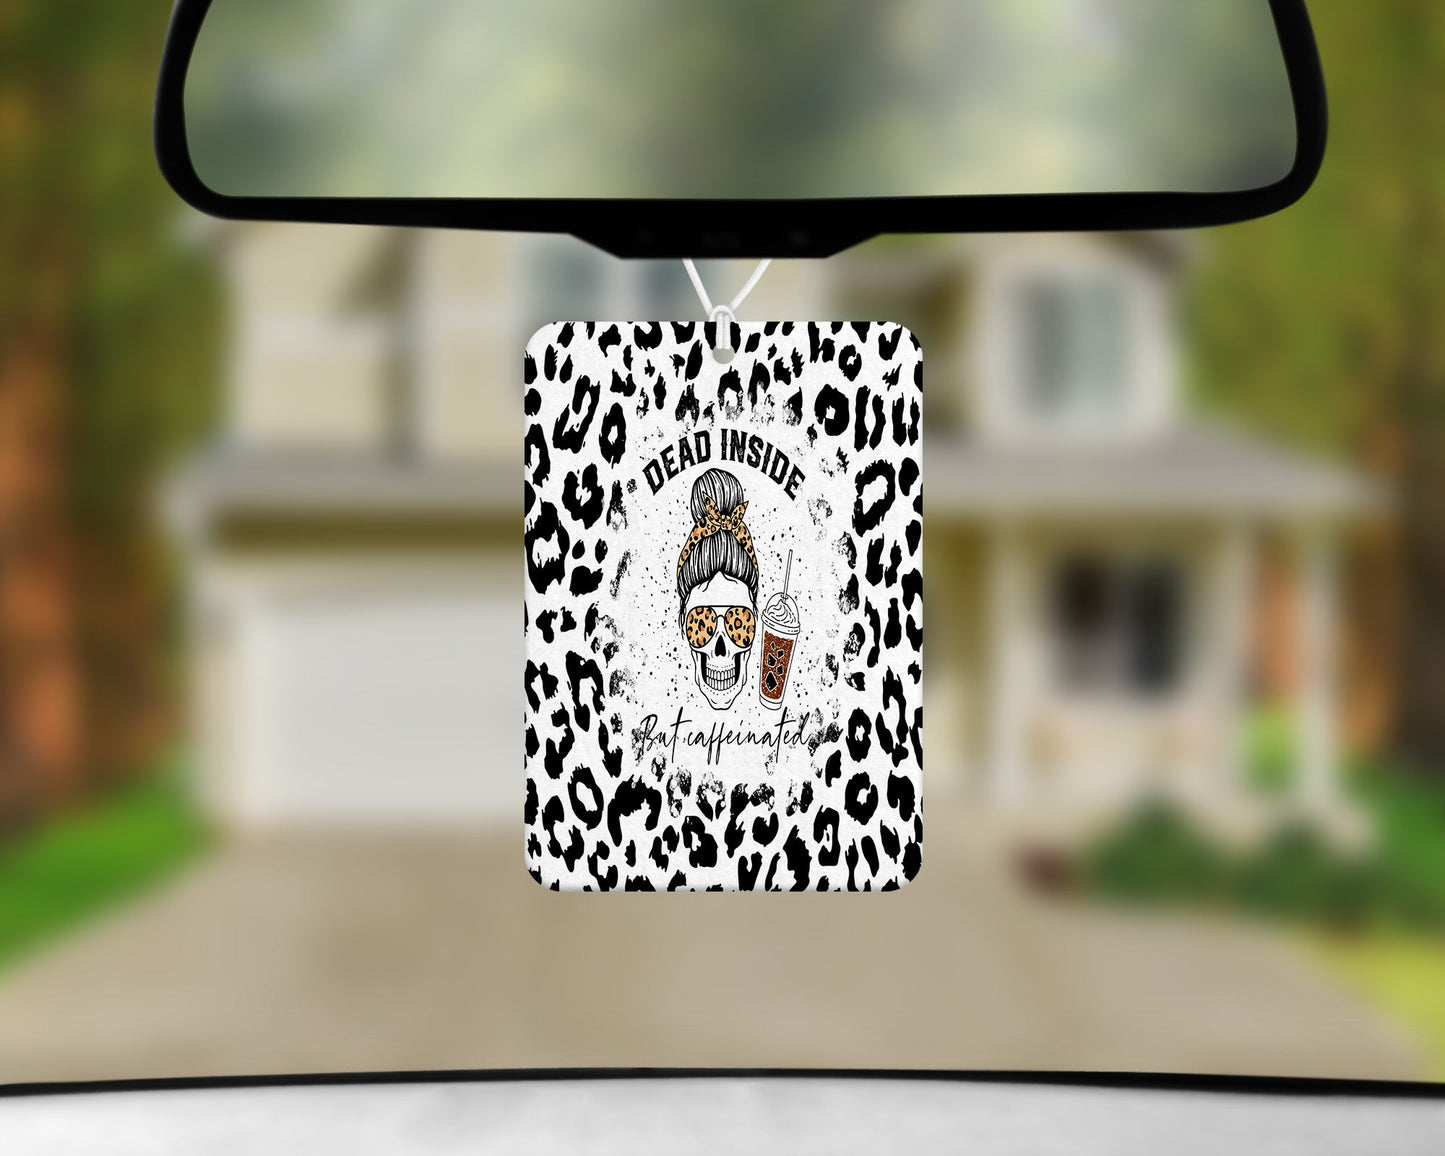 Dead Inside But Caffeinated|Freshie|Includes Scent Bottle - Vehicle Air Freshener